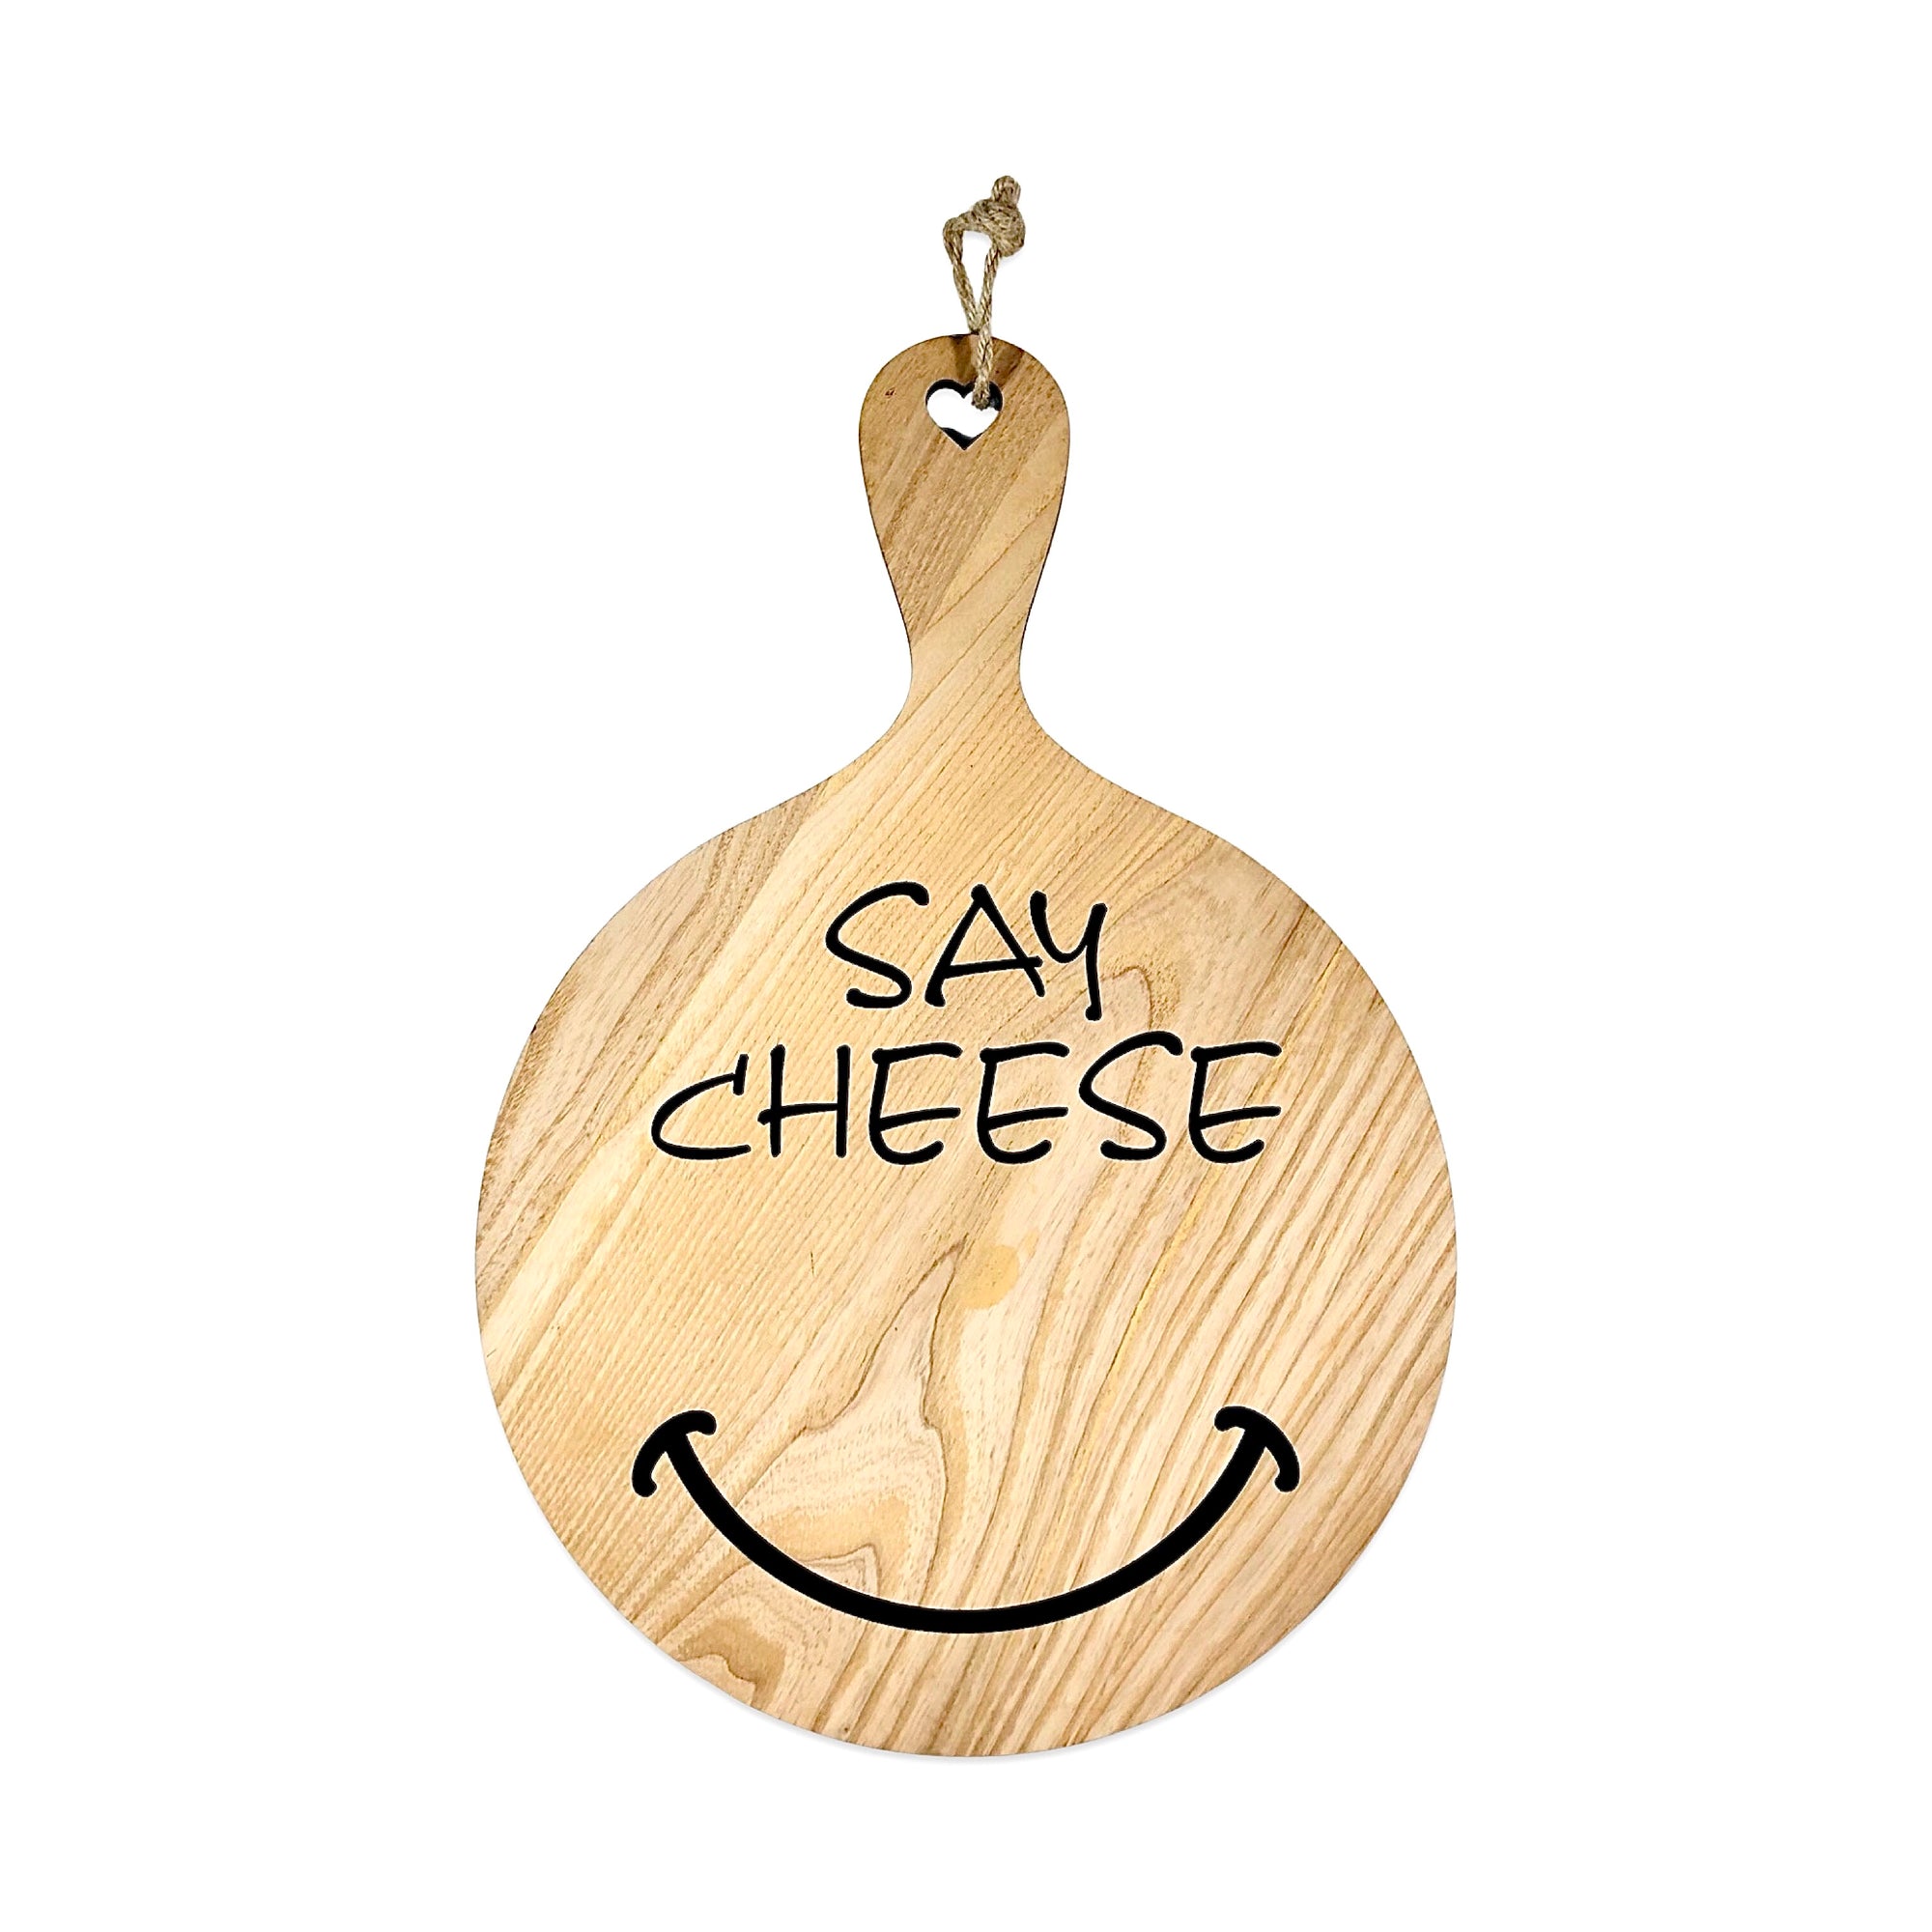 Stay Cheese Wooden Wall Quotation